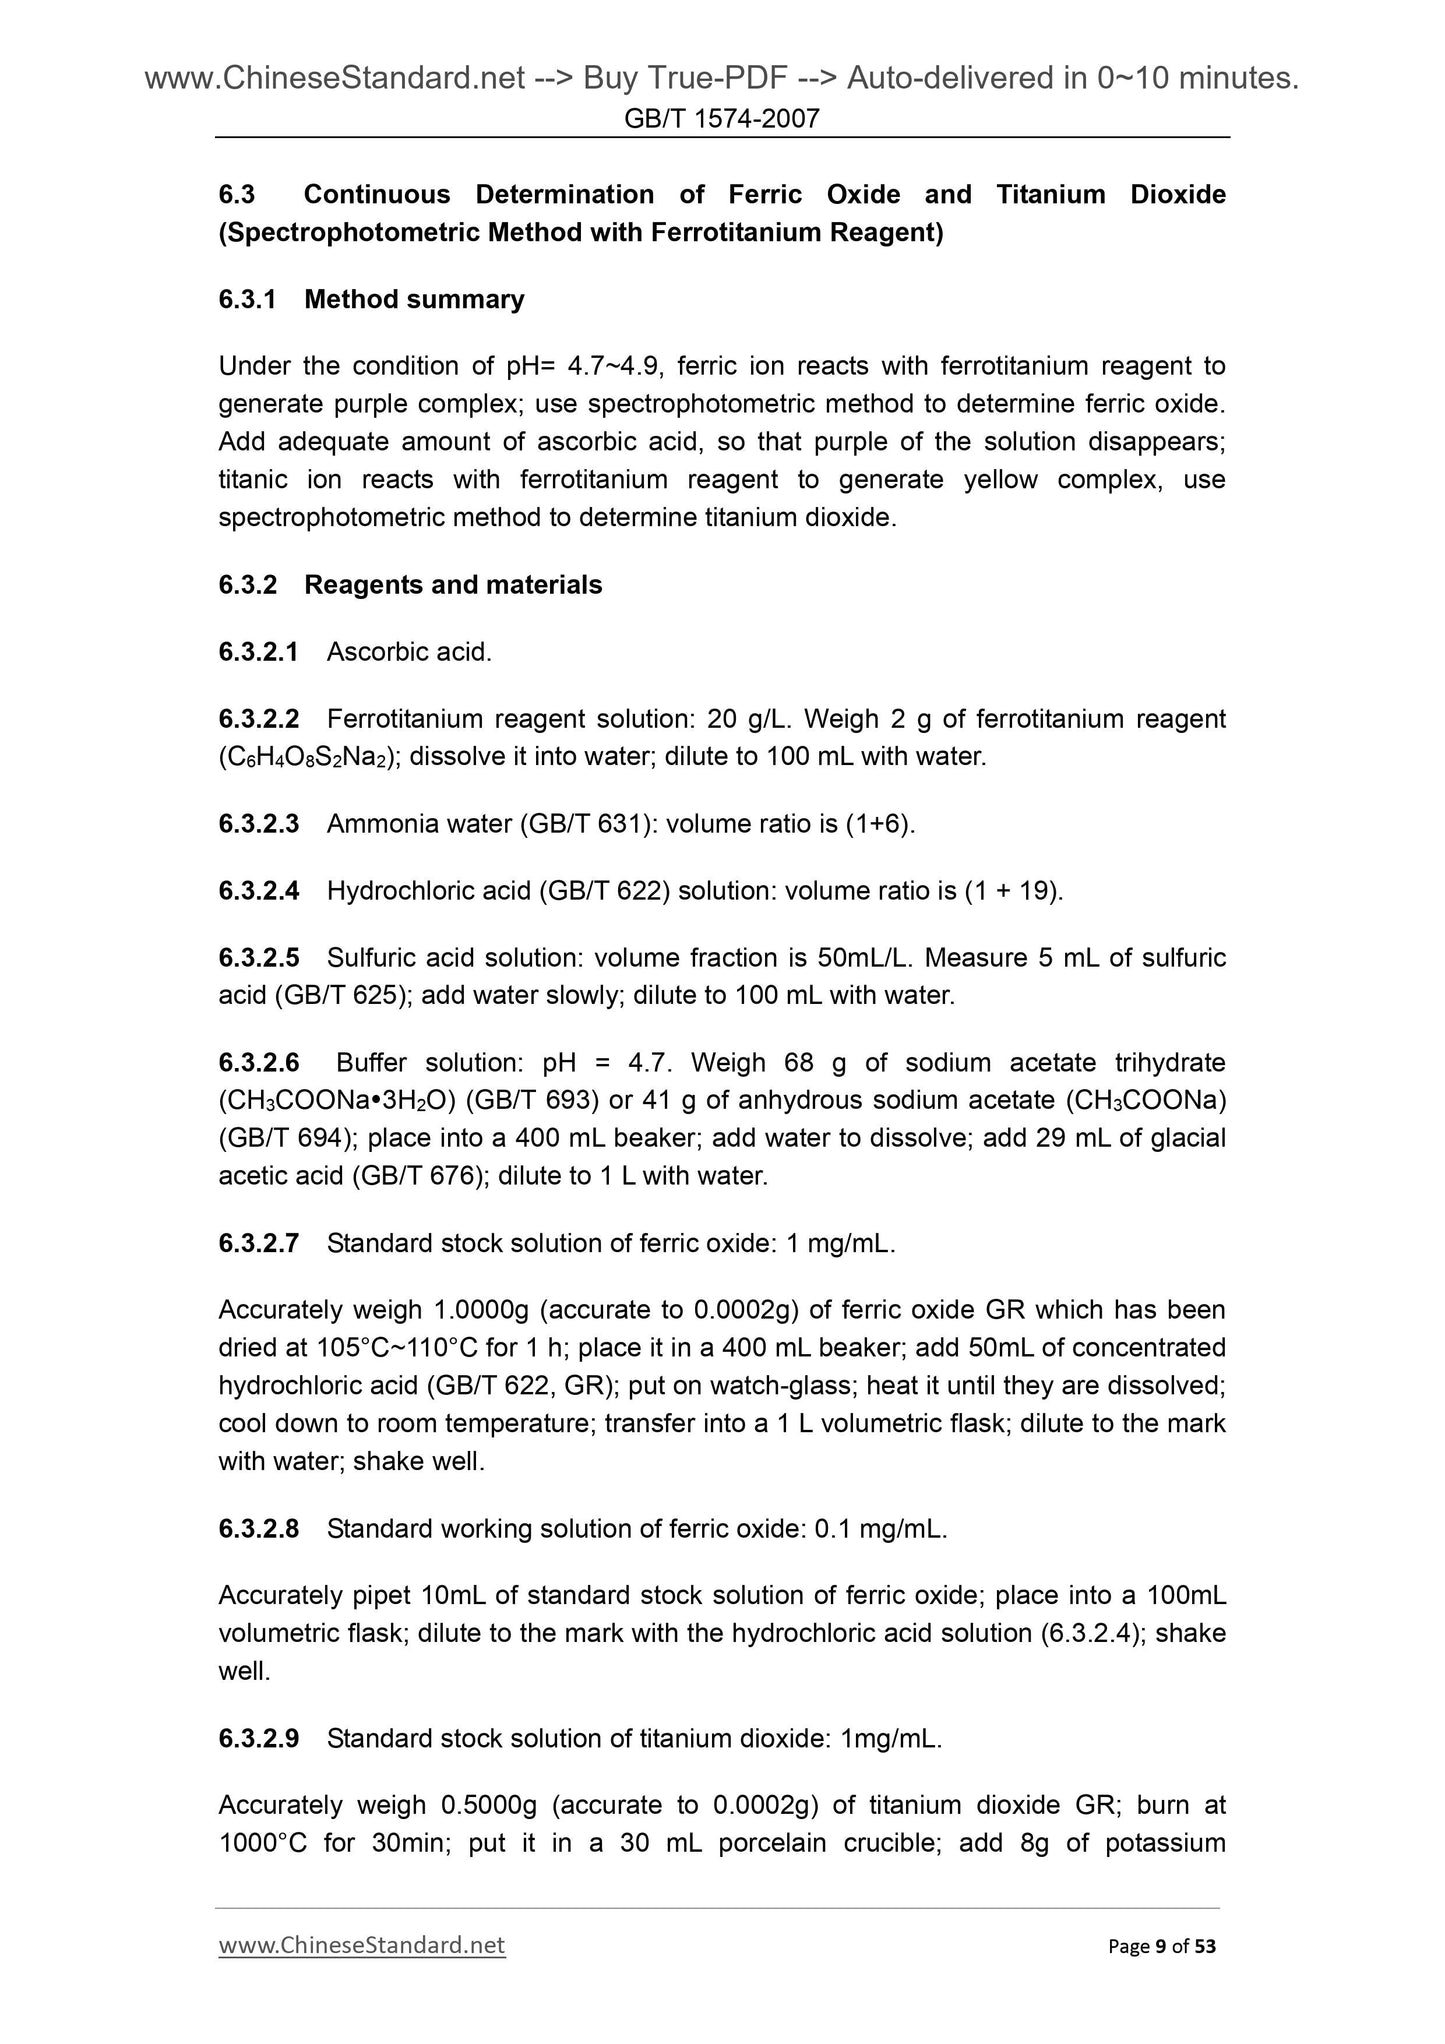 GB/T 1574-2007 Page 5